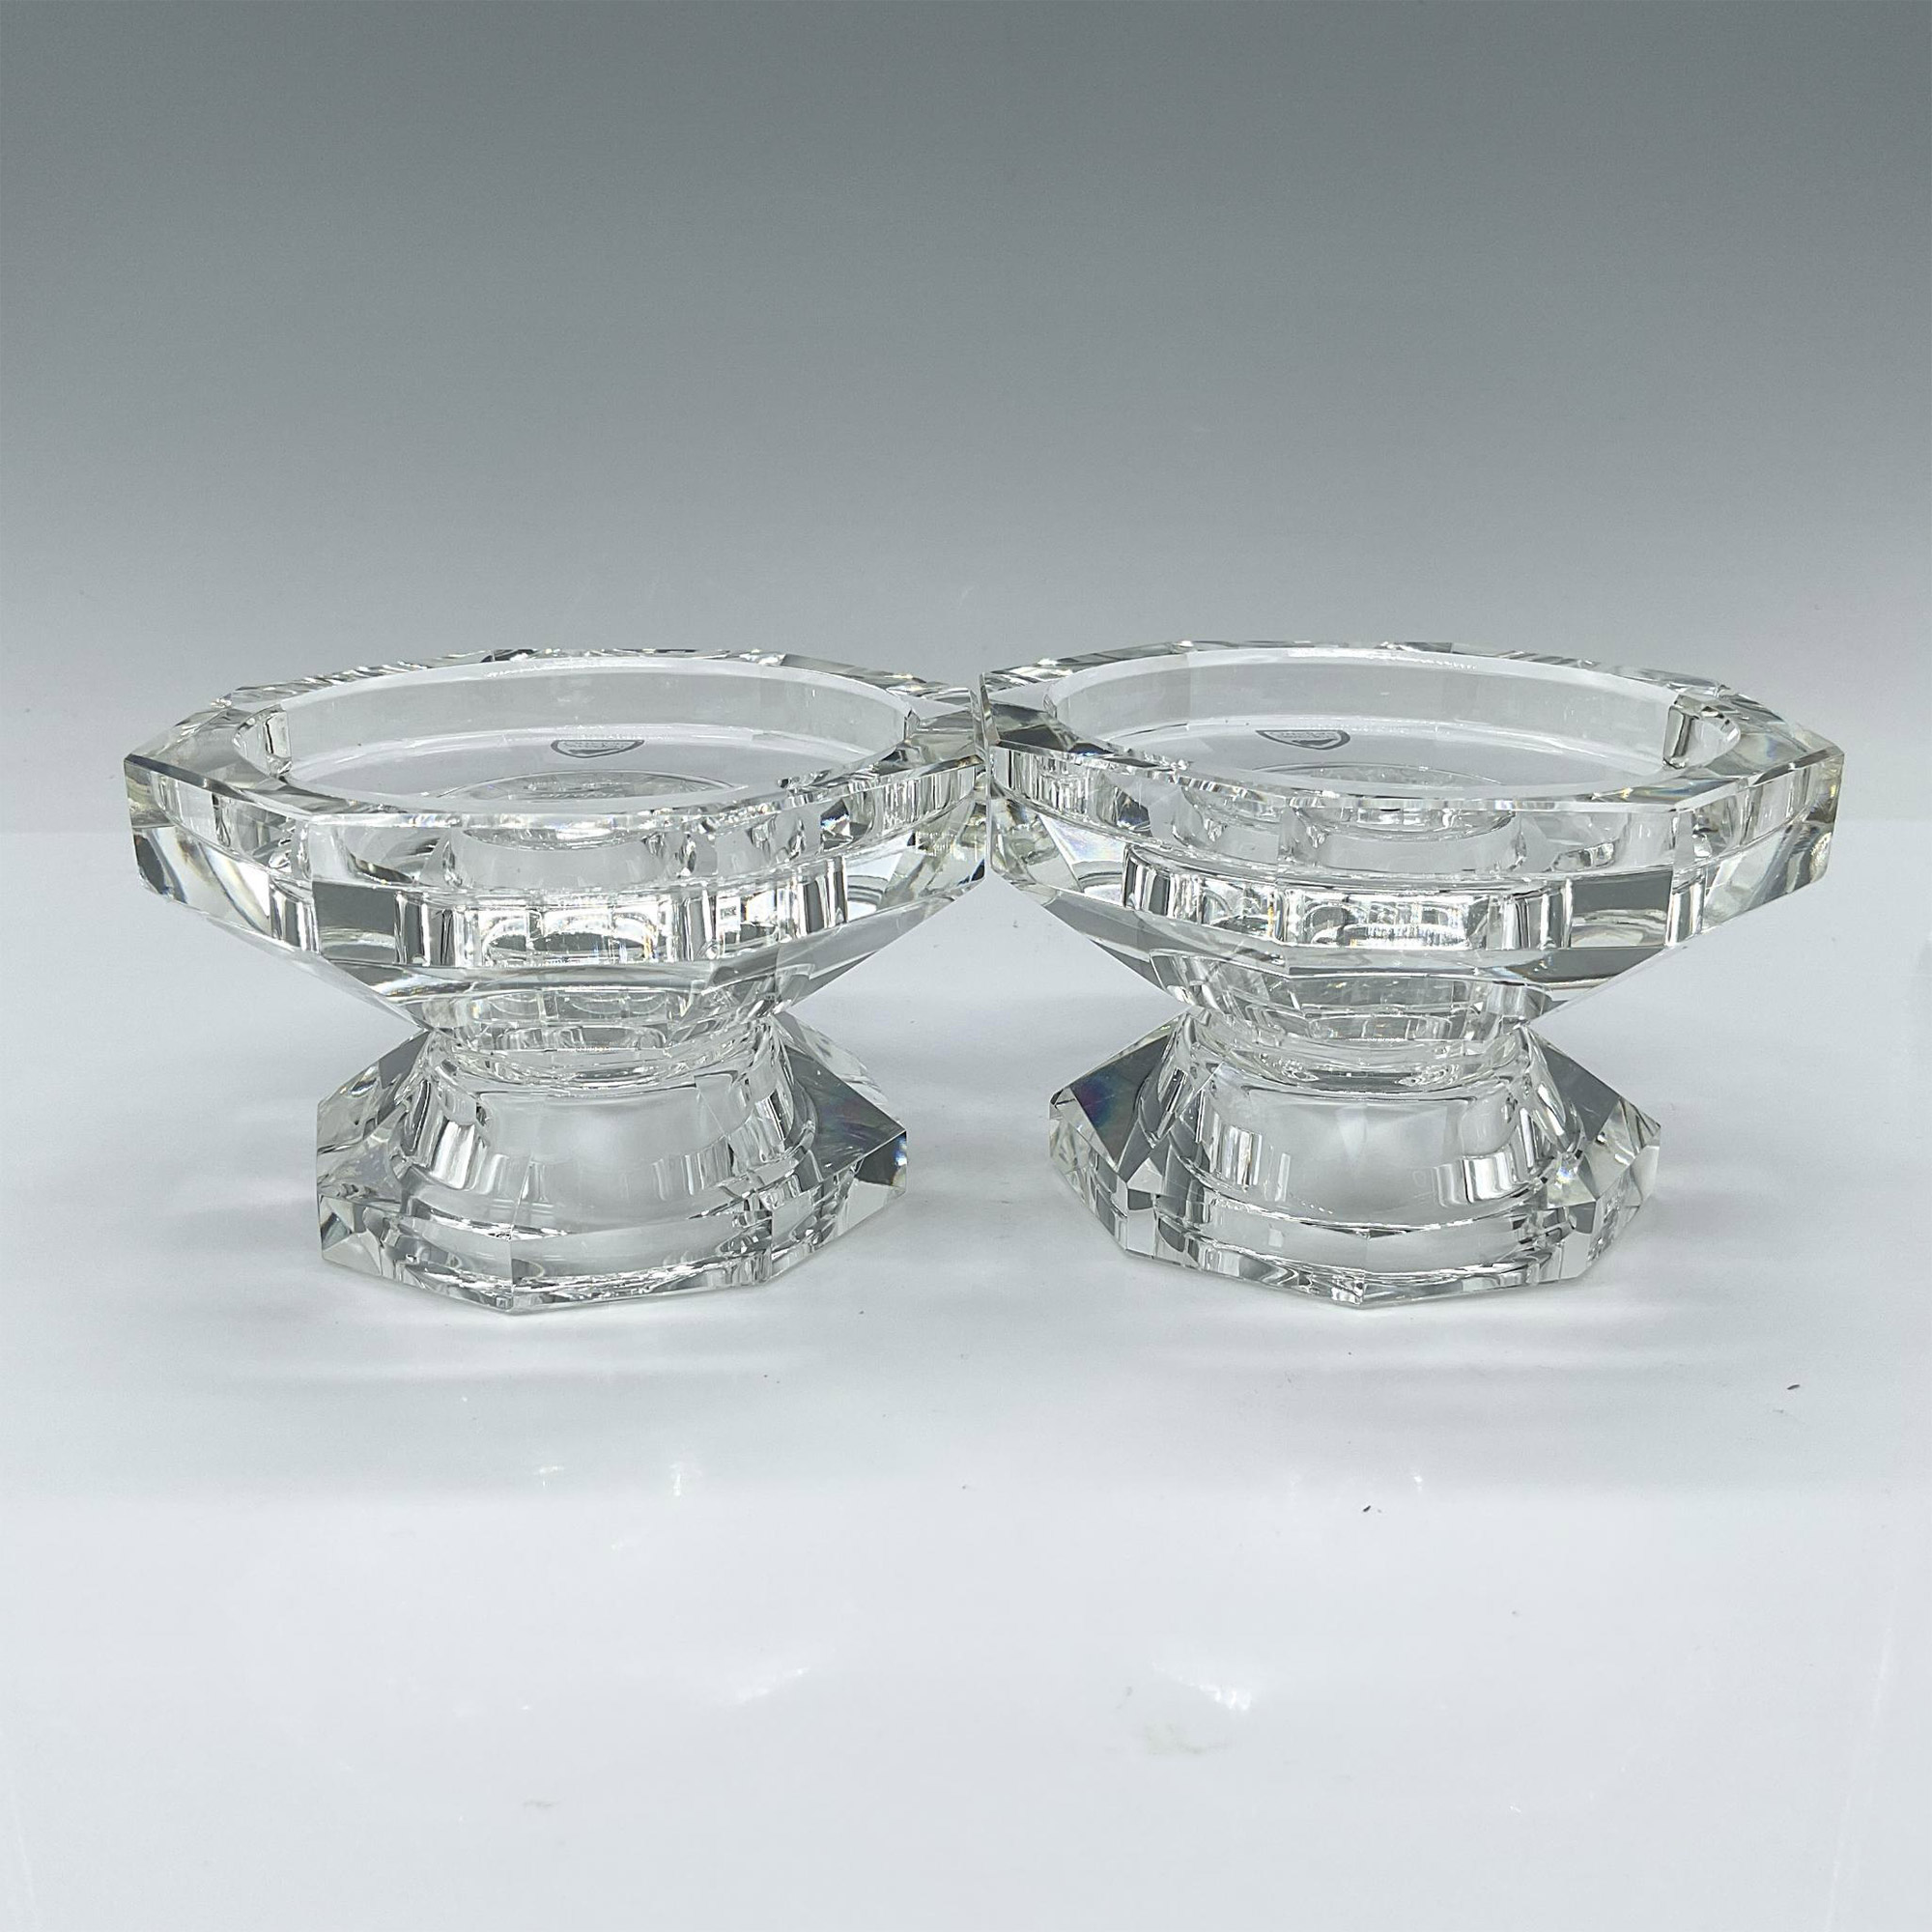 2pc Orrefors Crystal Candle Holders, Totem Trio - Image 2 of 4